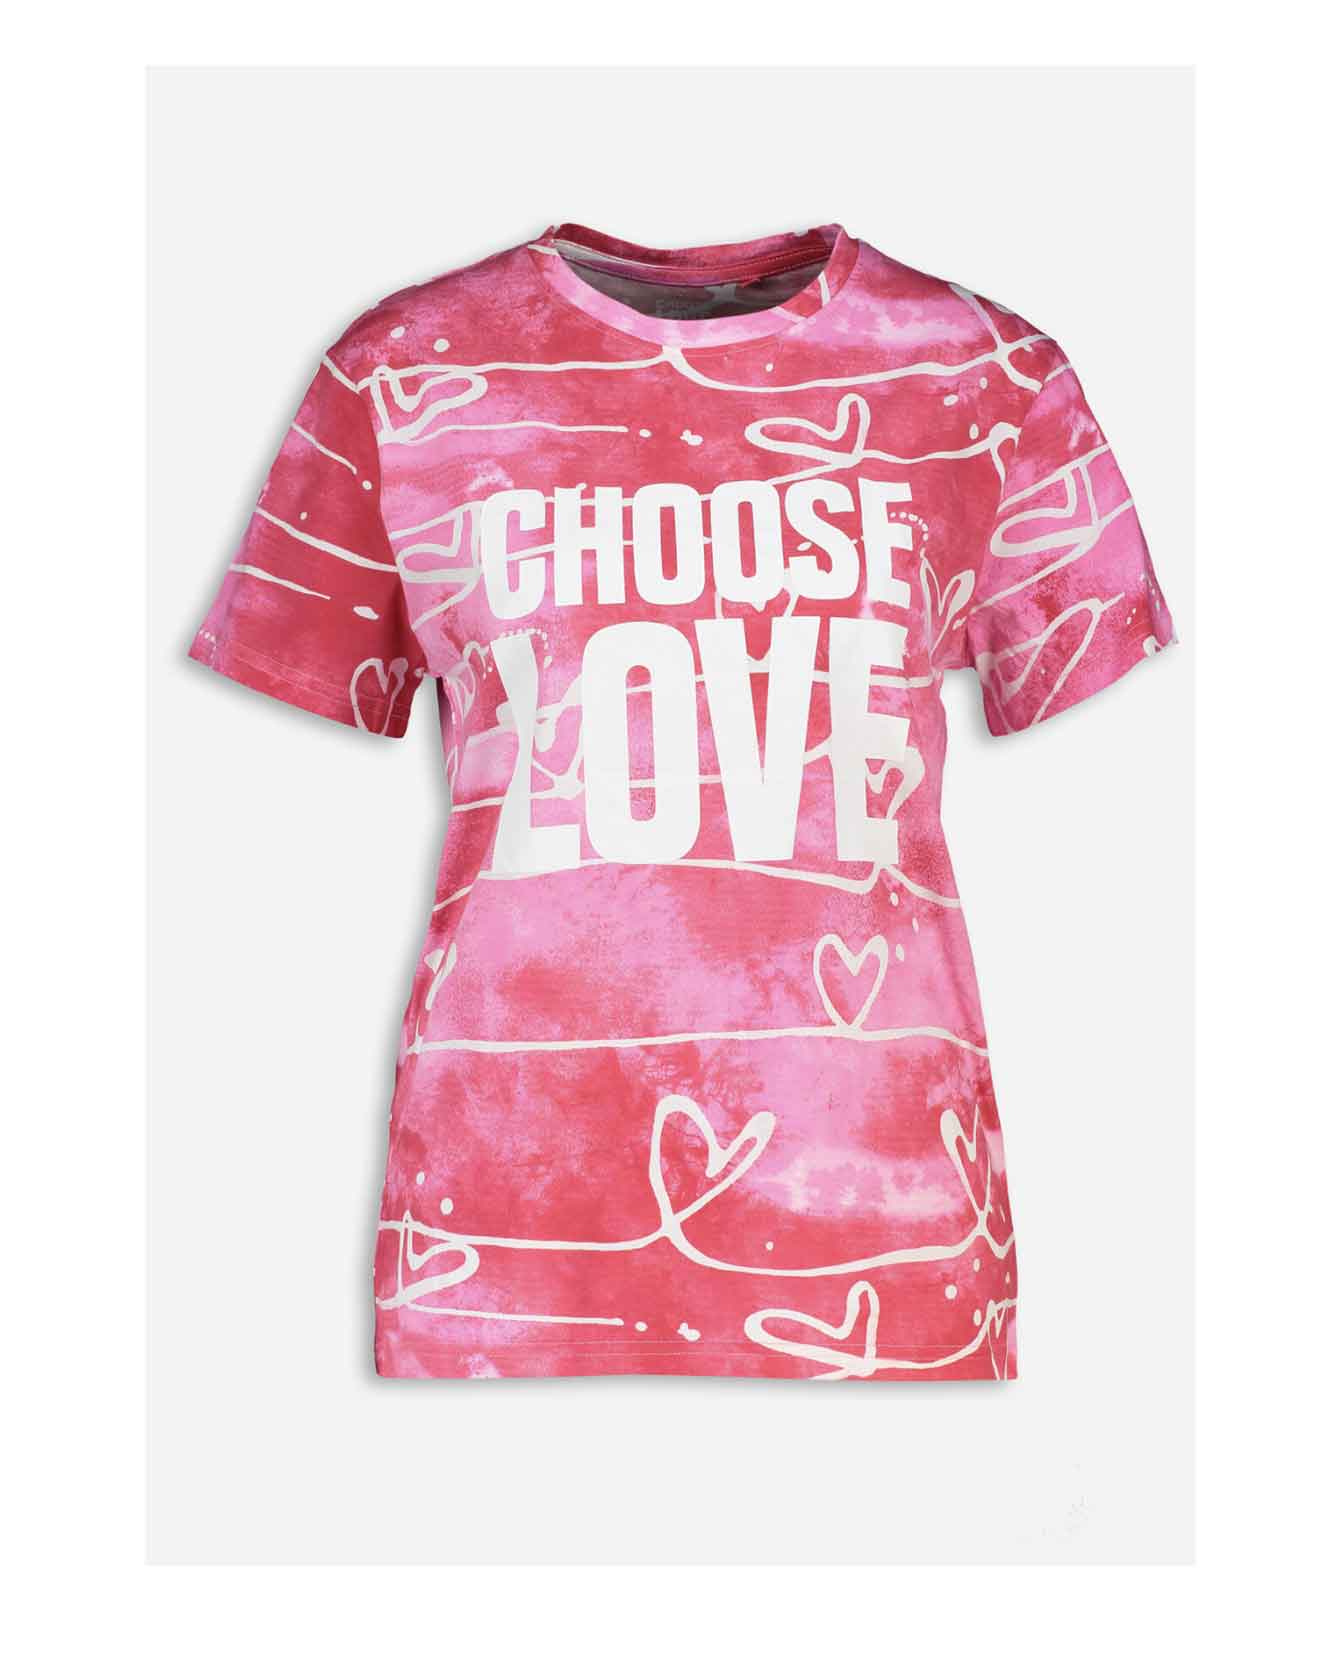 Illustrated t-shirt as part of a range of merchandise for CHOOSE LOVE charity in collaboration with TK Maxx and Print Club London. Repeat pattern of linear love hearts with a watercolour gradient ink background. Pink ink background.